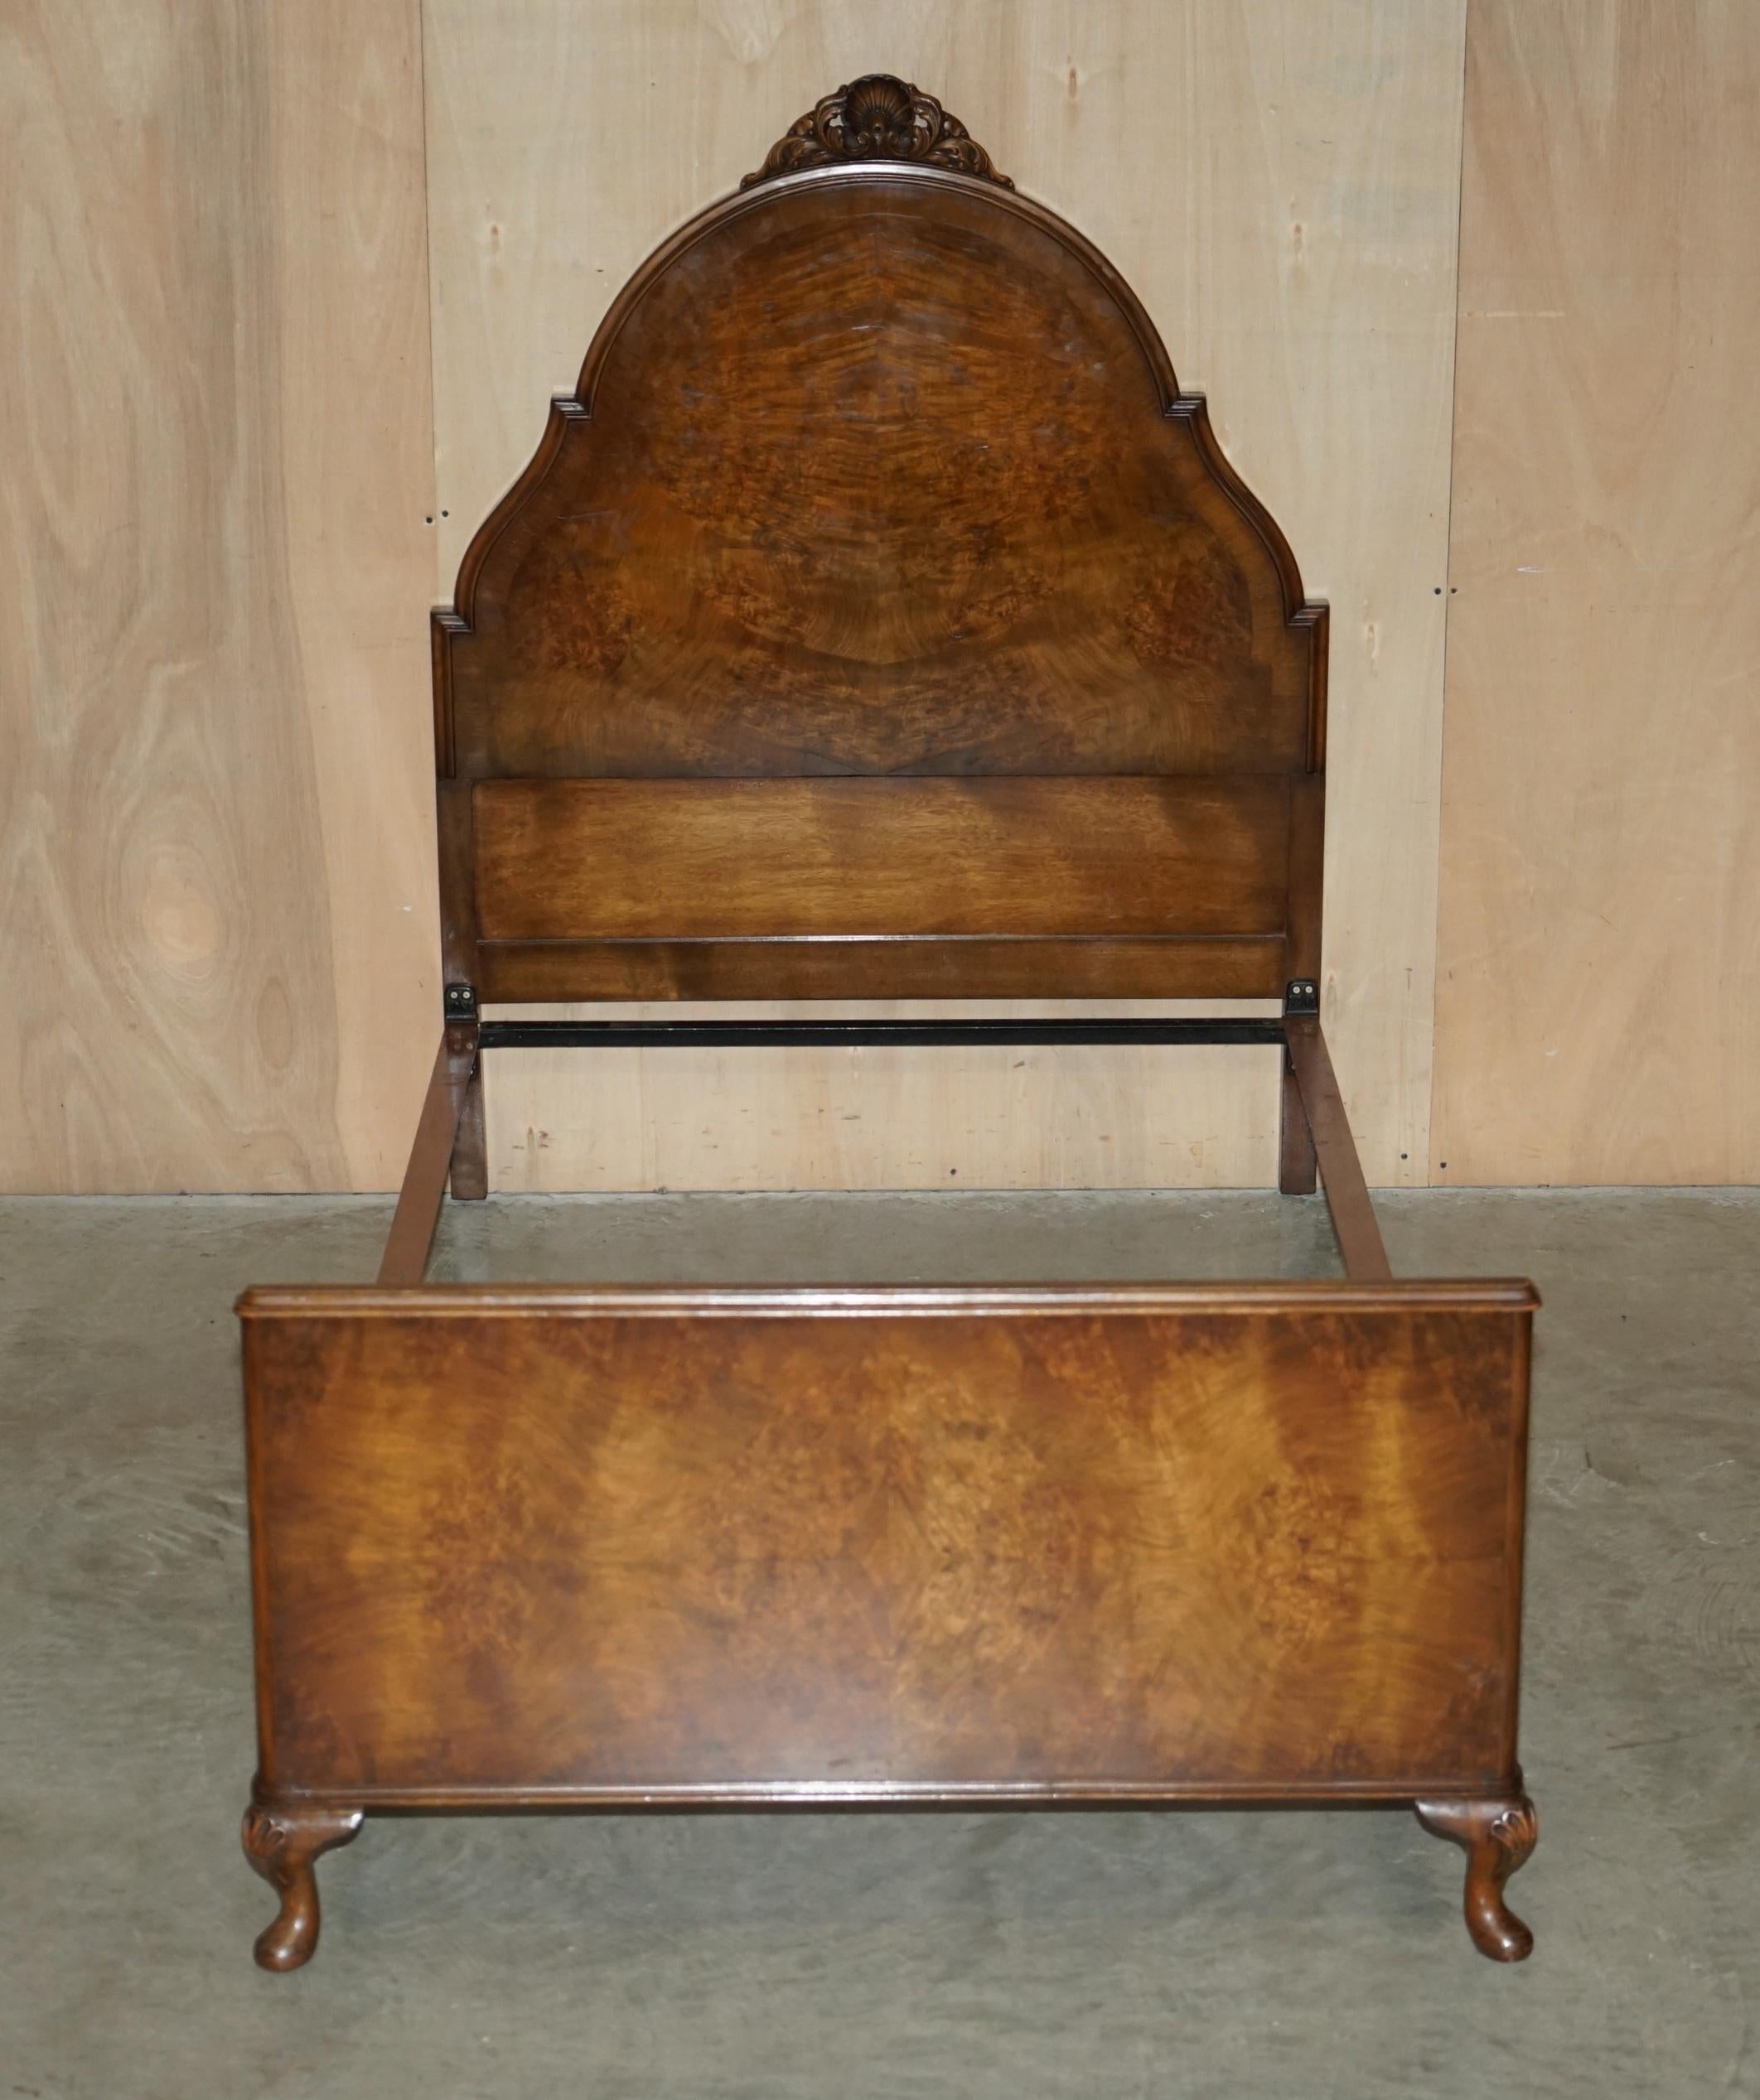 Royal House Antiques

Royal House Antiques is delighted to offer for sale this stunning Circa 1900 Burr Walnut bedstead frame with Vono rails

Please note the delivery fee listed is just a guide, it covers within the M25 only for the UK and local